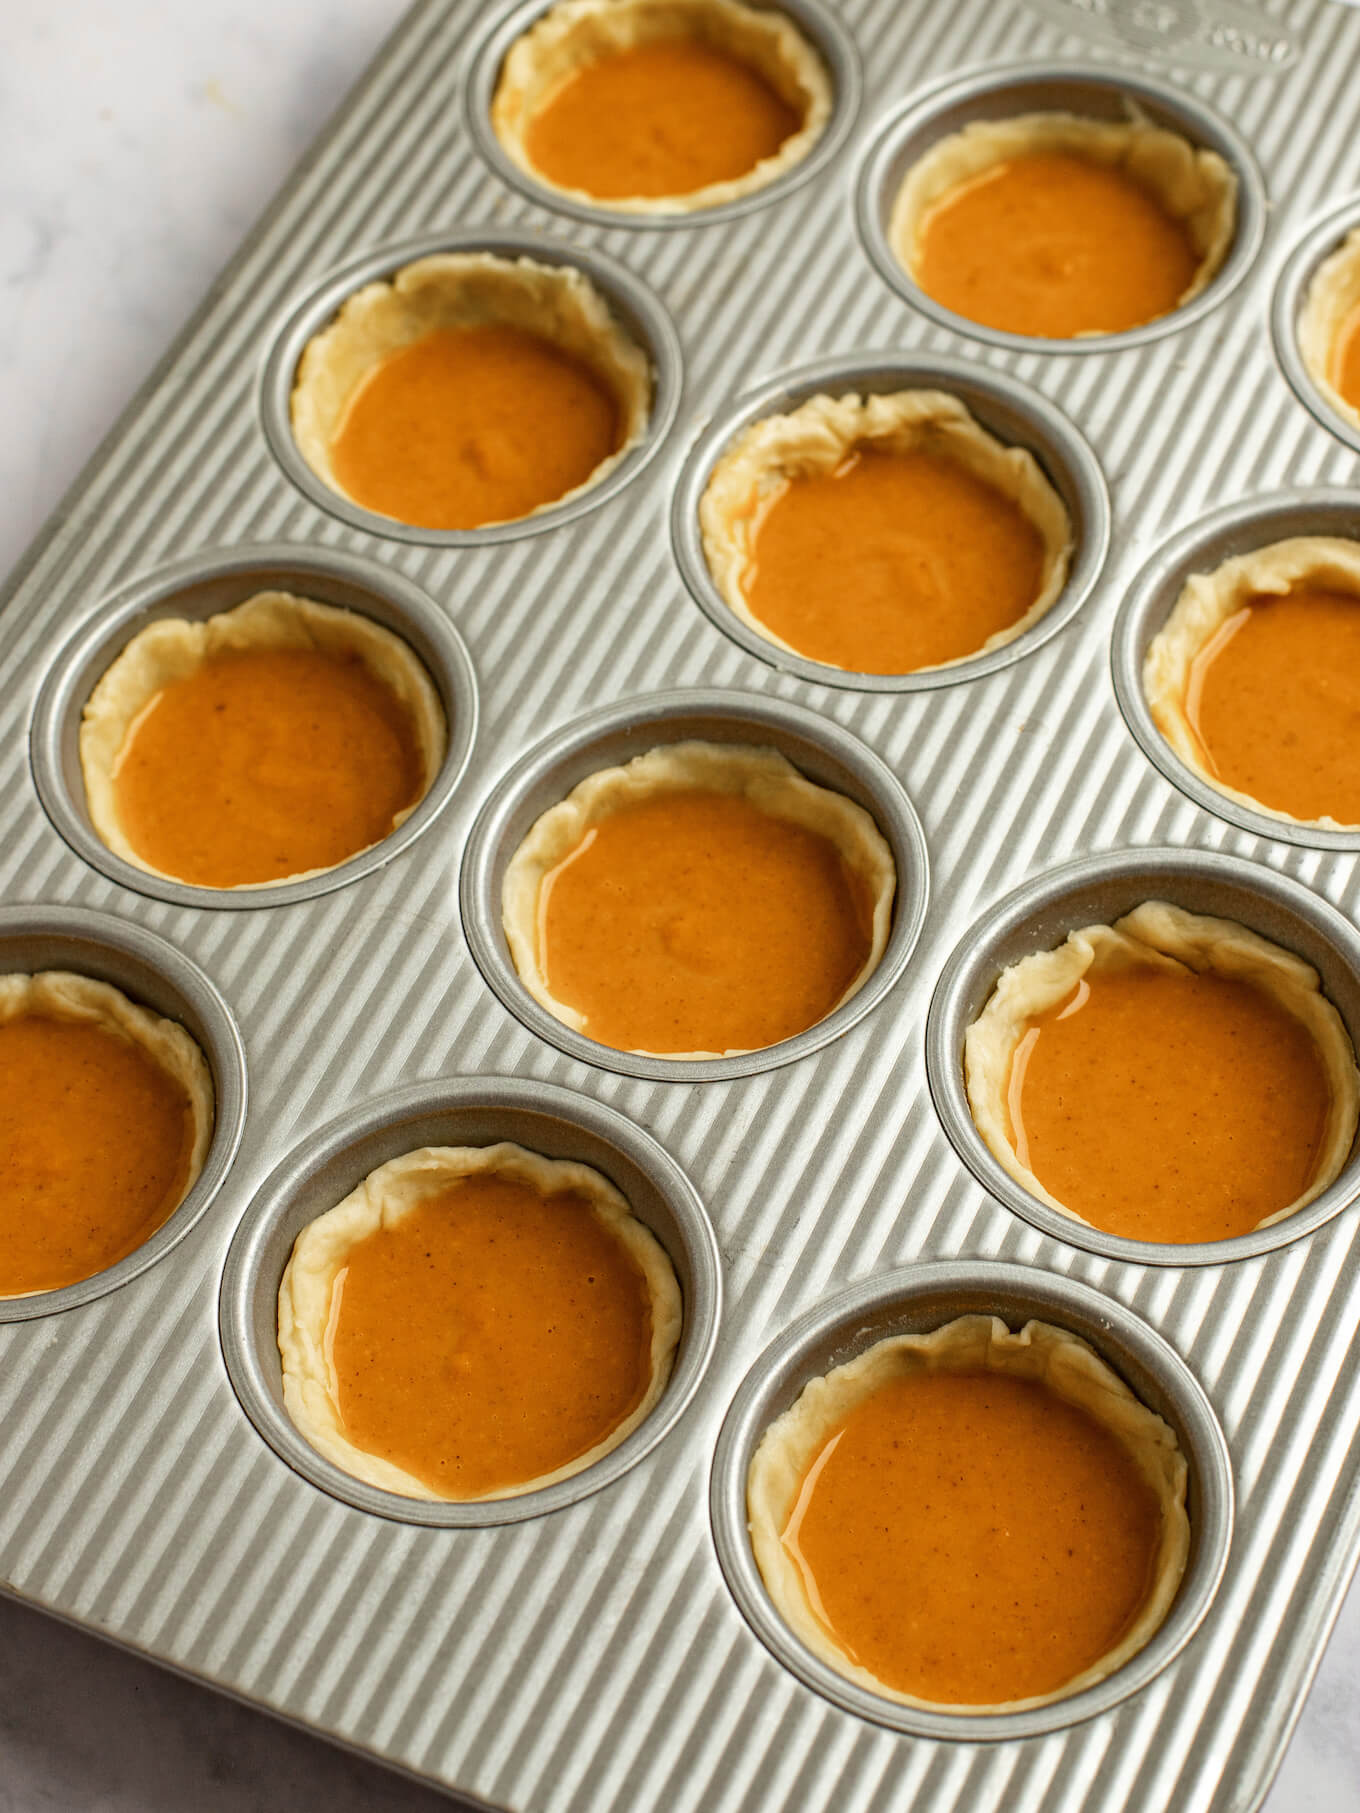 Pumpkin pie filling added to the pie crusts in the muffin pan.